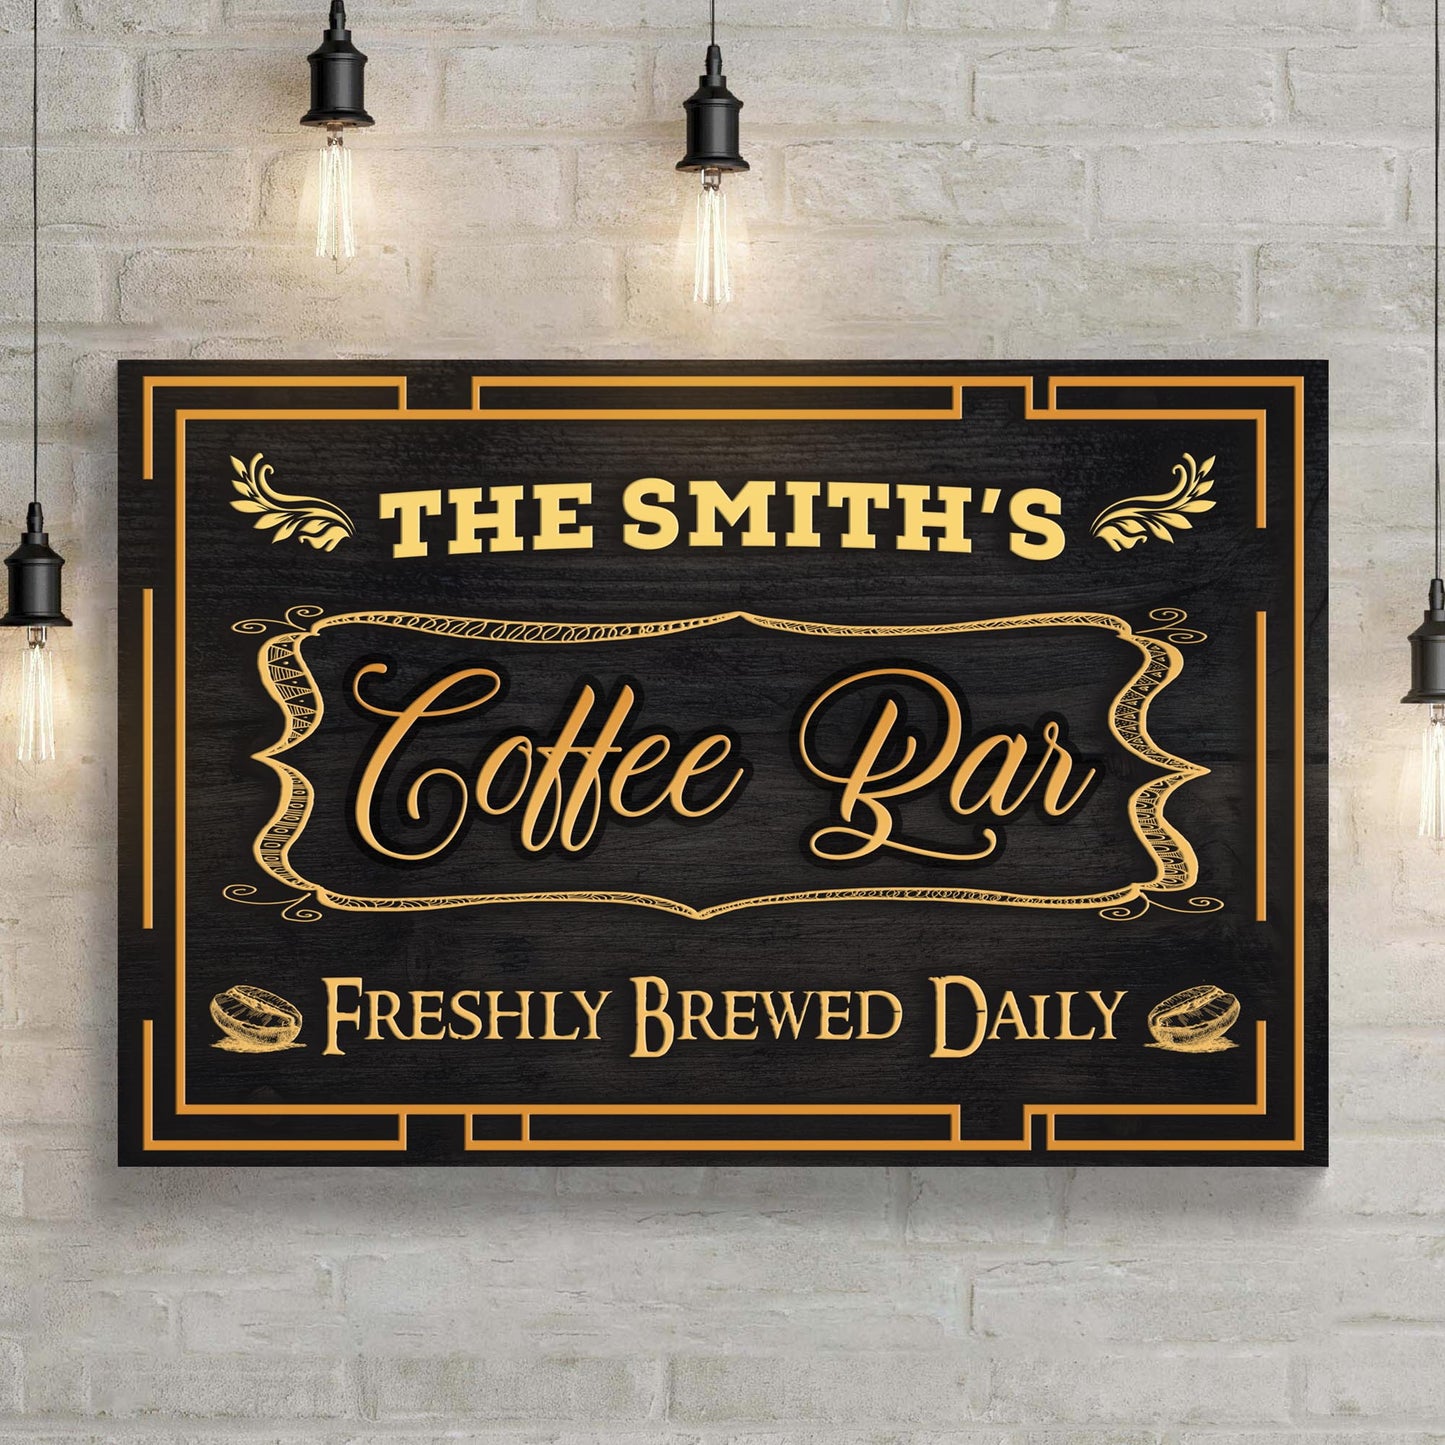 Coffee Bar Freshly Brewed Daily Sign - Image by Tailored Canvases